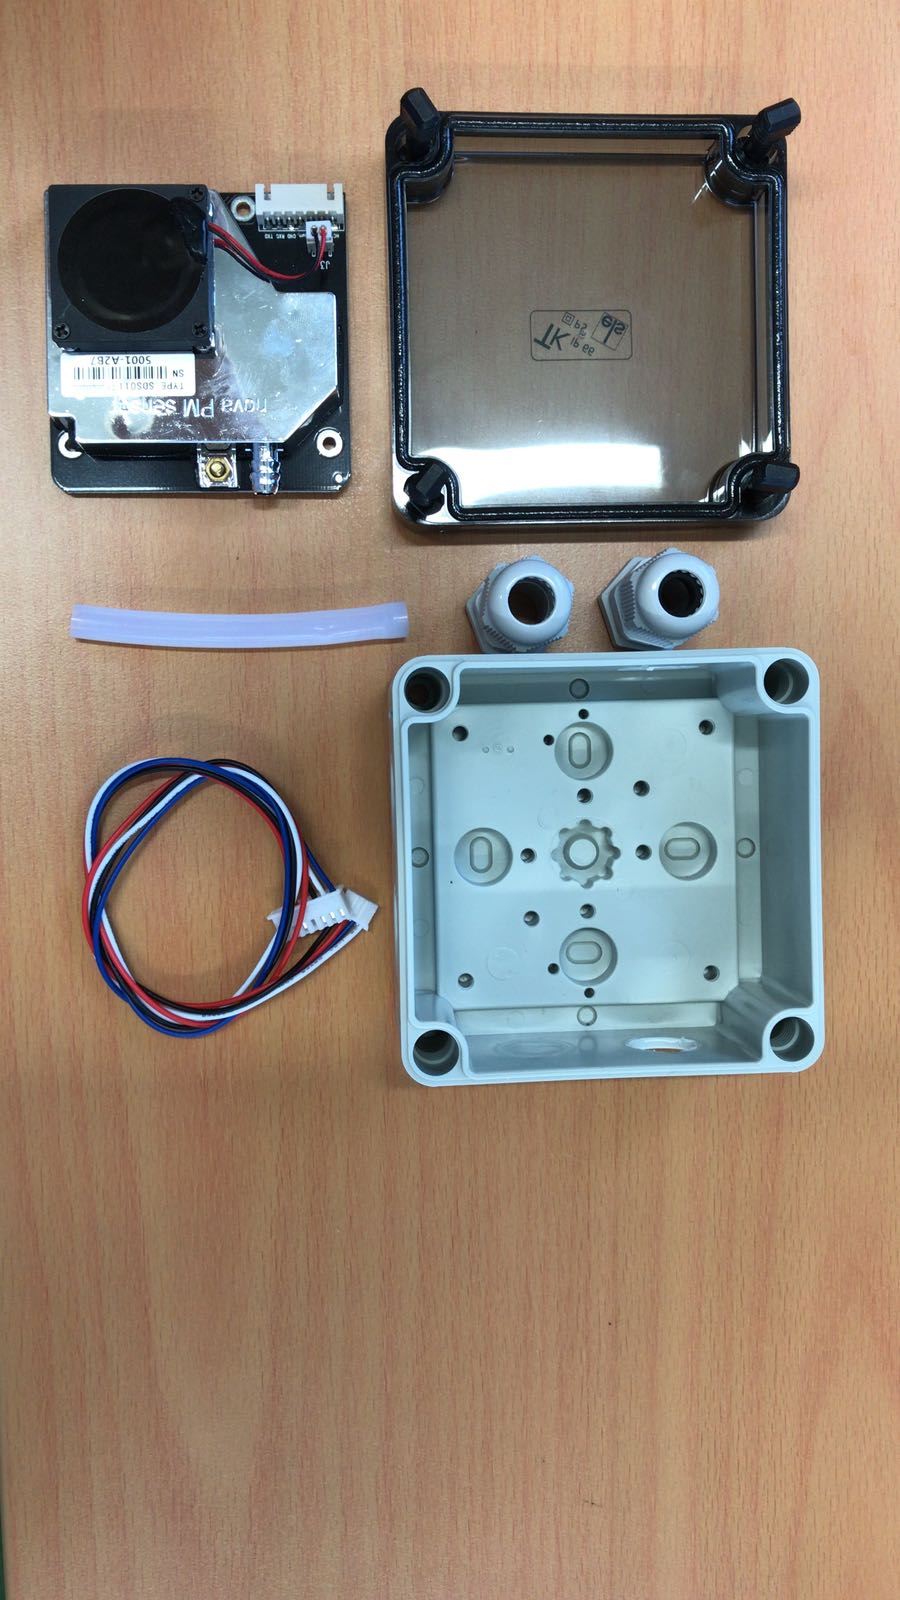 Components of the fine dust sensor